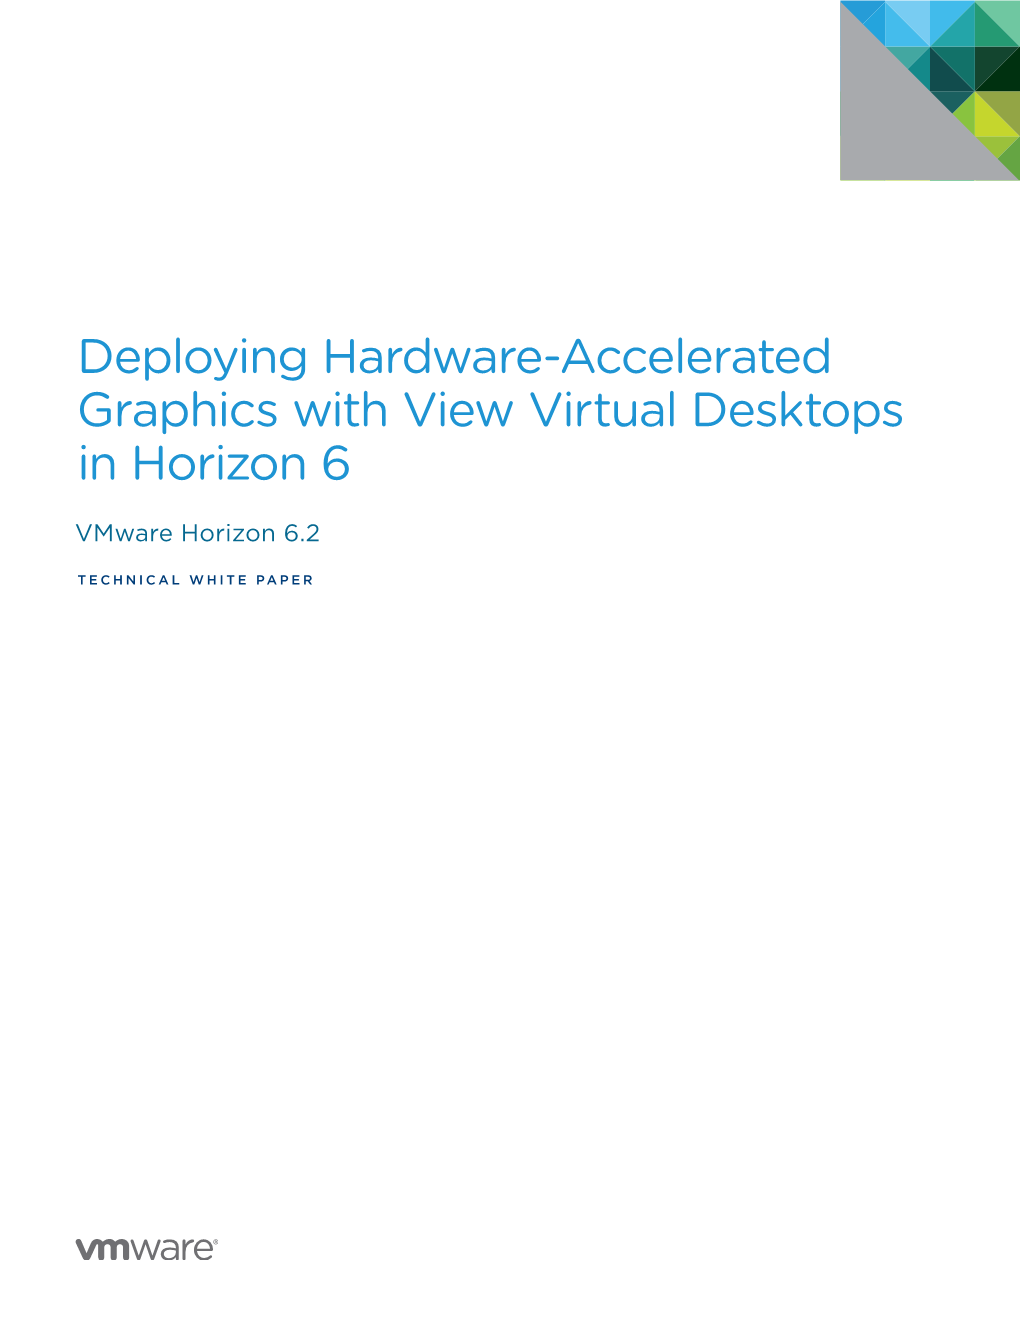 Deploying Hardware-Accelerated Graphics with View Virtual Desktops in Horizon 6